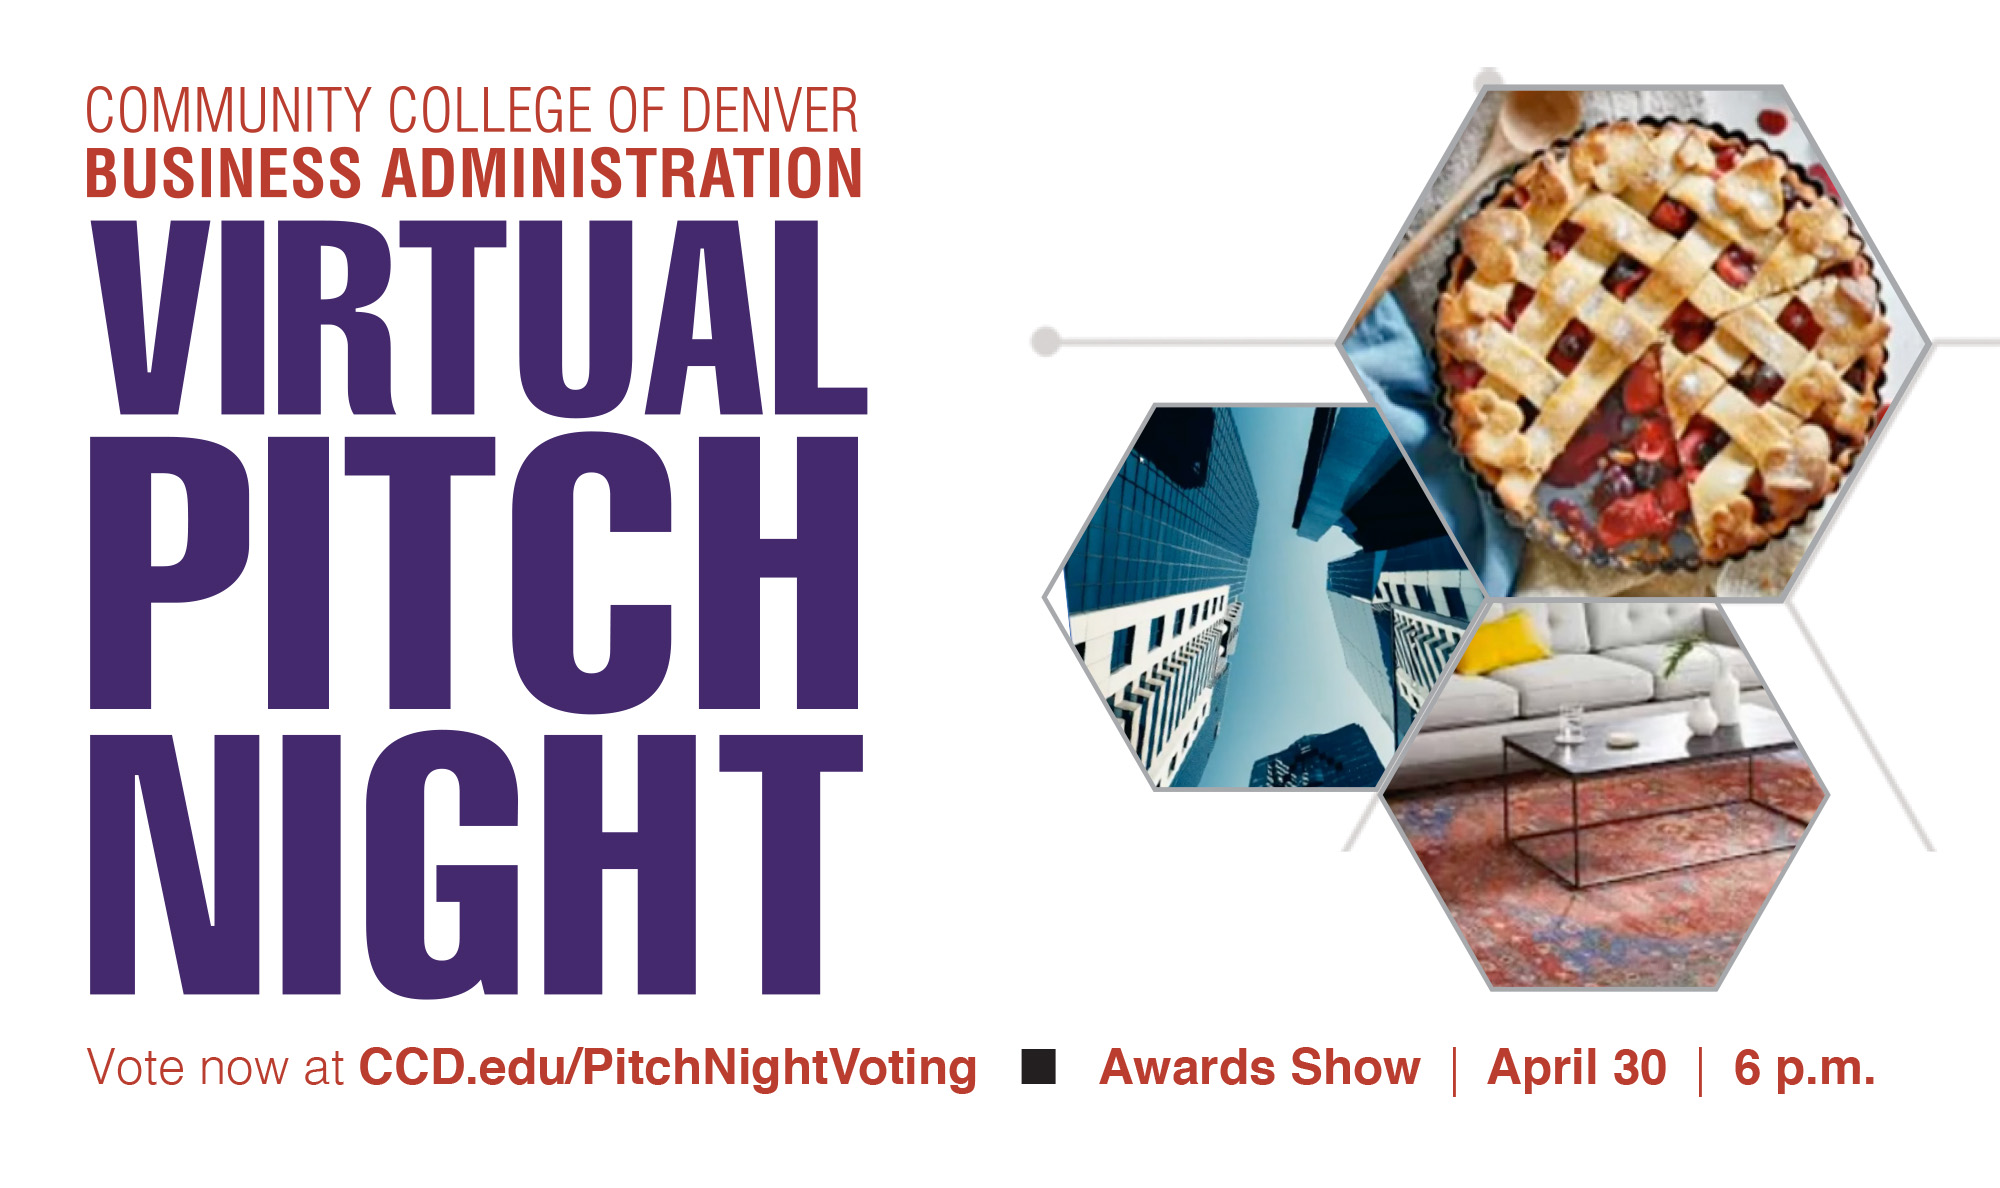 virtual pitch night text promotion